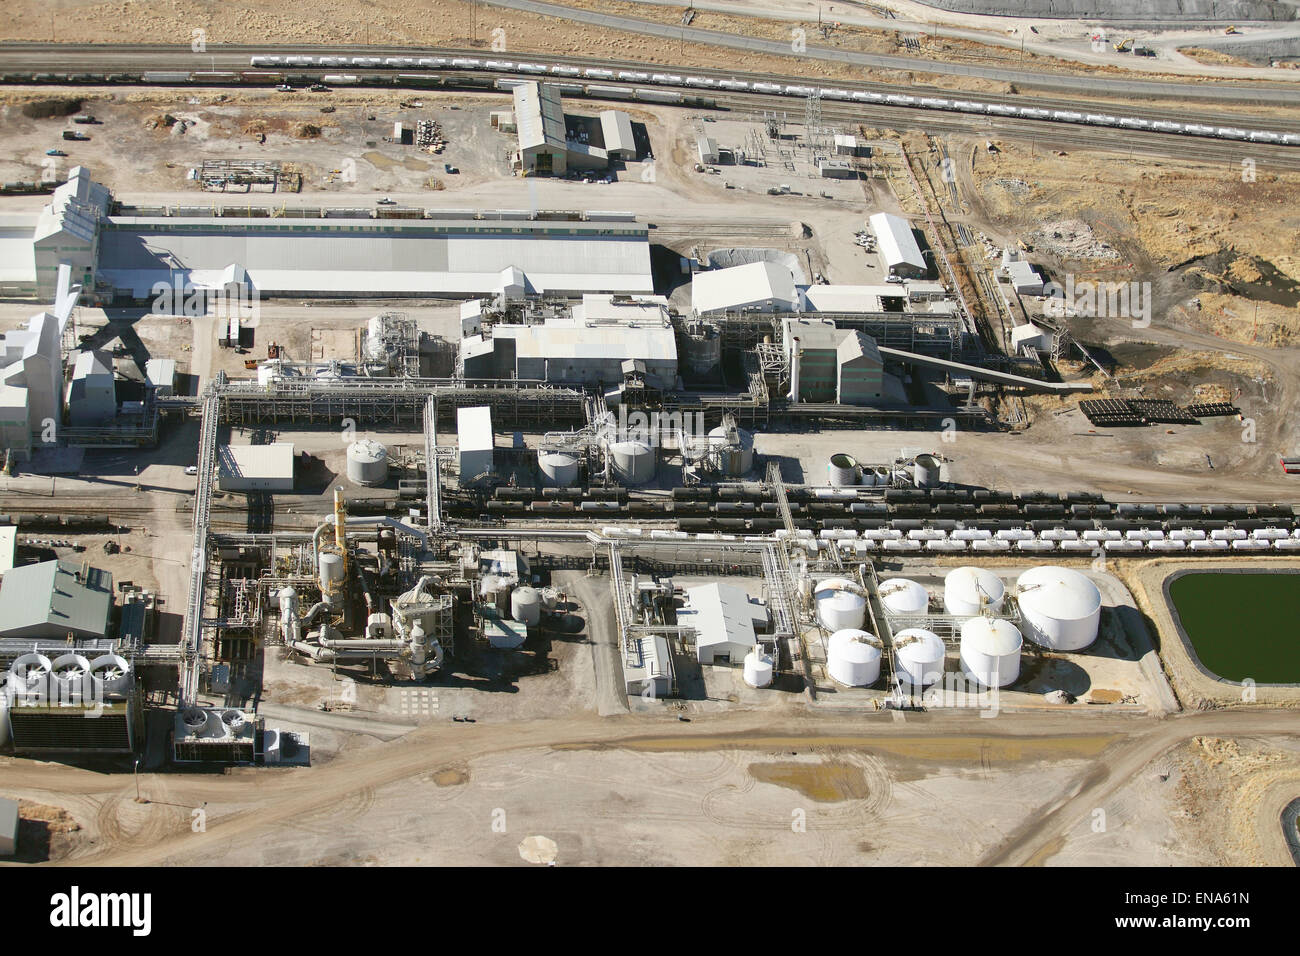 An aerial view of the processing facility at a phosphate mine. Stock Photo